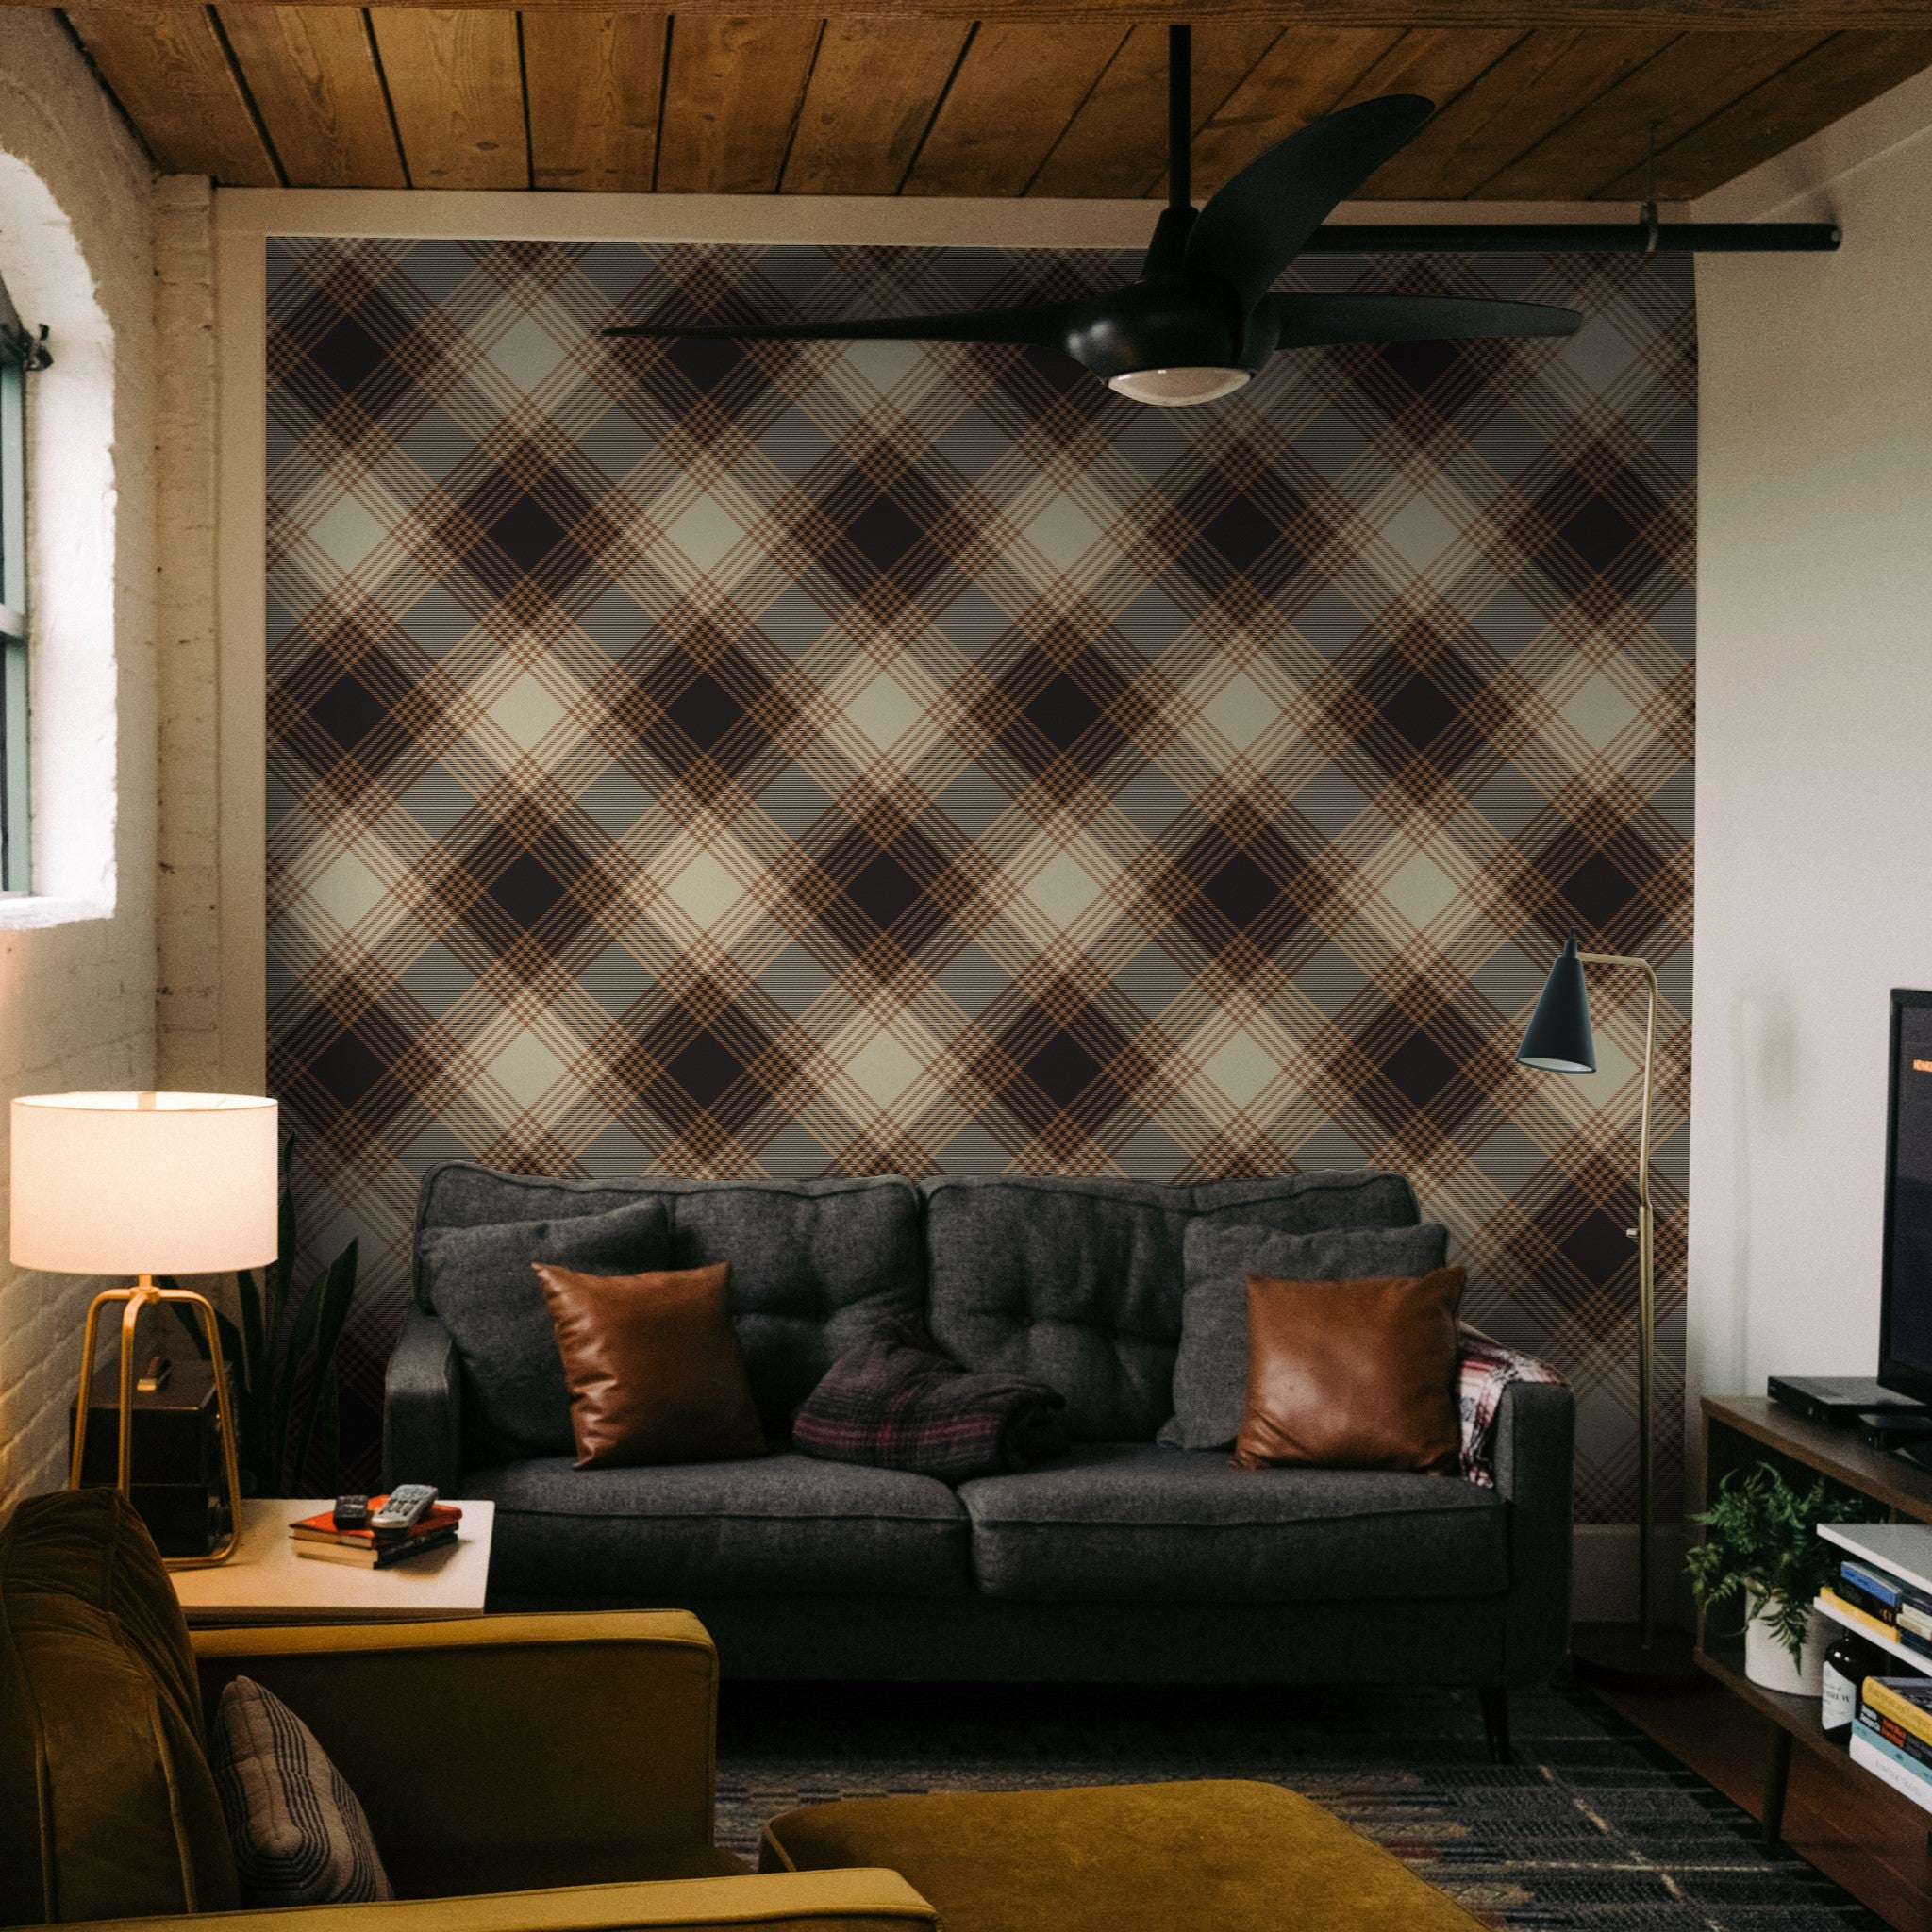 "Cozy living room featuring Wall Blush Franklin Wallpaper with plaid design accent wall and stylish decor."